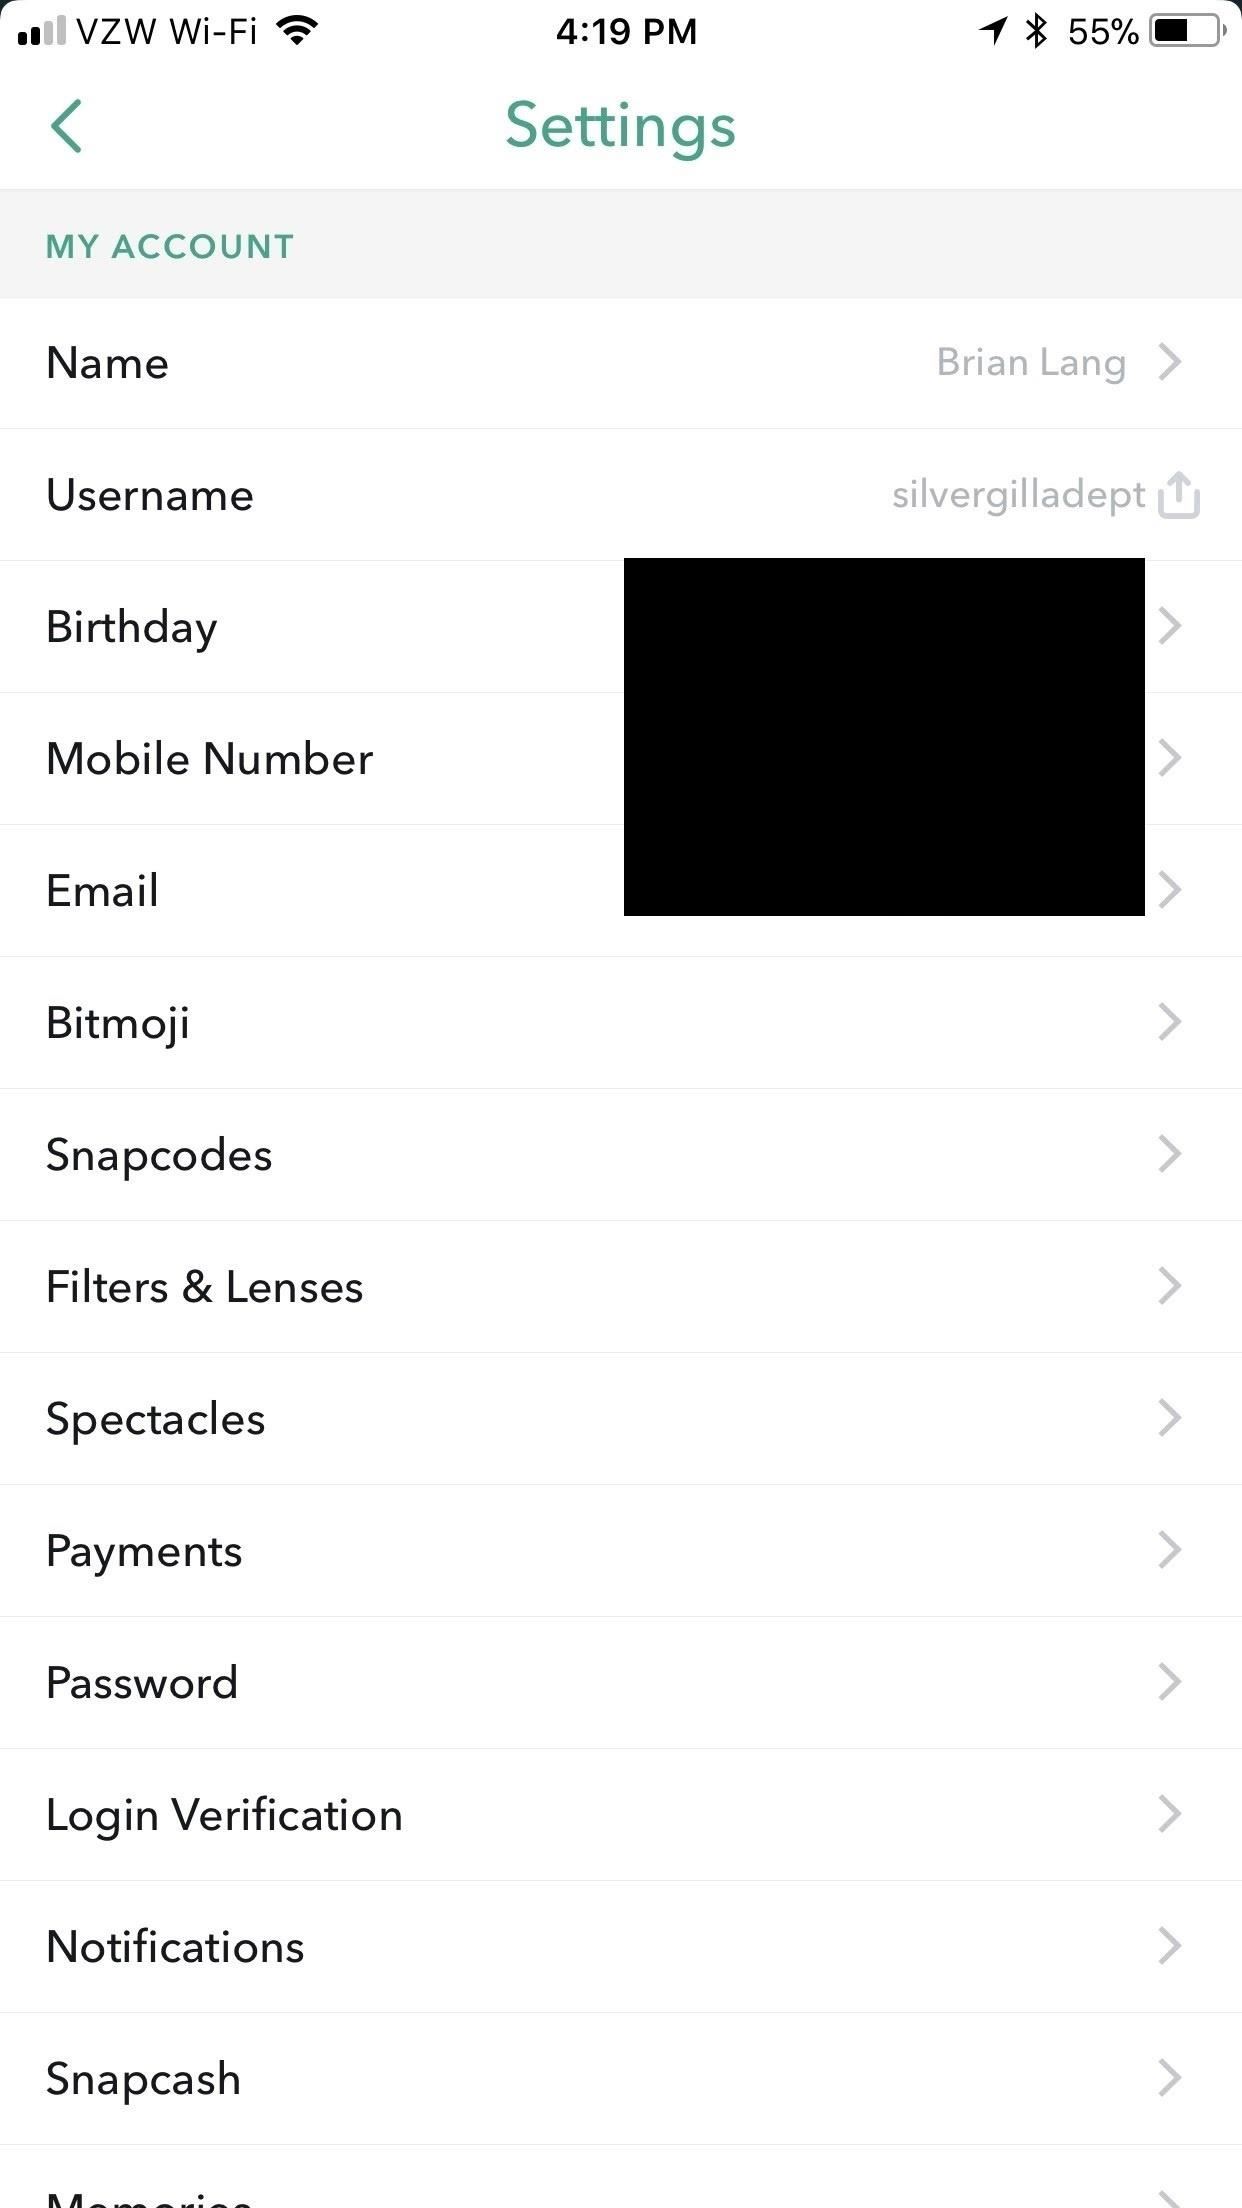 Snapchat 101: 6 Privacy Settings You Need to Check on Android & iPhone